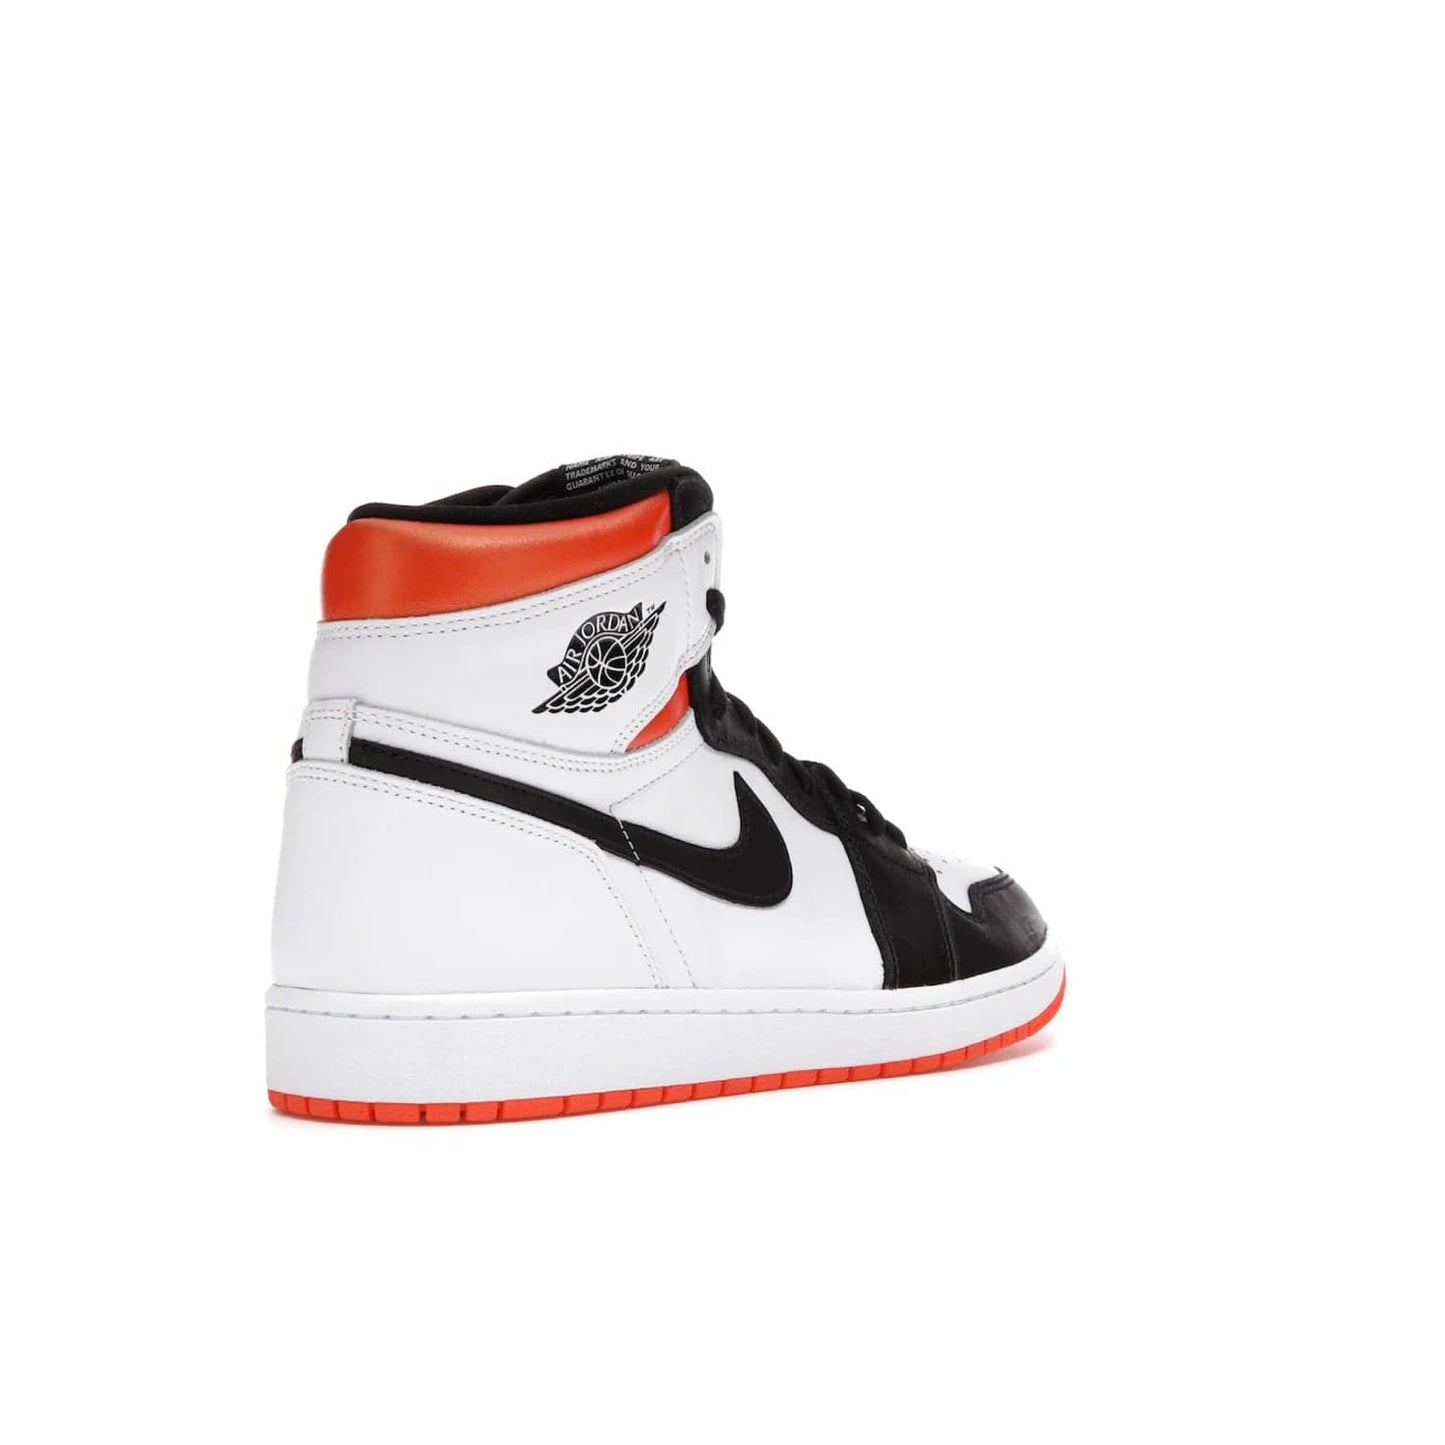 Jordan 1 Retro High Electro Orange - Image 32 - Only at www.BallersClubKickz.com - This Air Jordan 1 Retro High Electro Orange features a white leather upper with black overlays and vibrant Hyper Orange ankle wrap. Turn heads with this iconic design of woven tongue label and sole. Get yours today and add some serious style to your rotation.